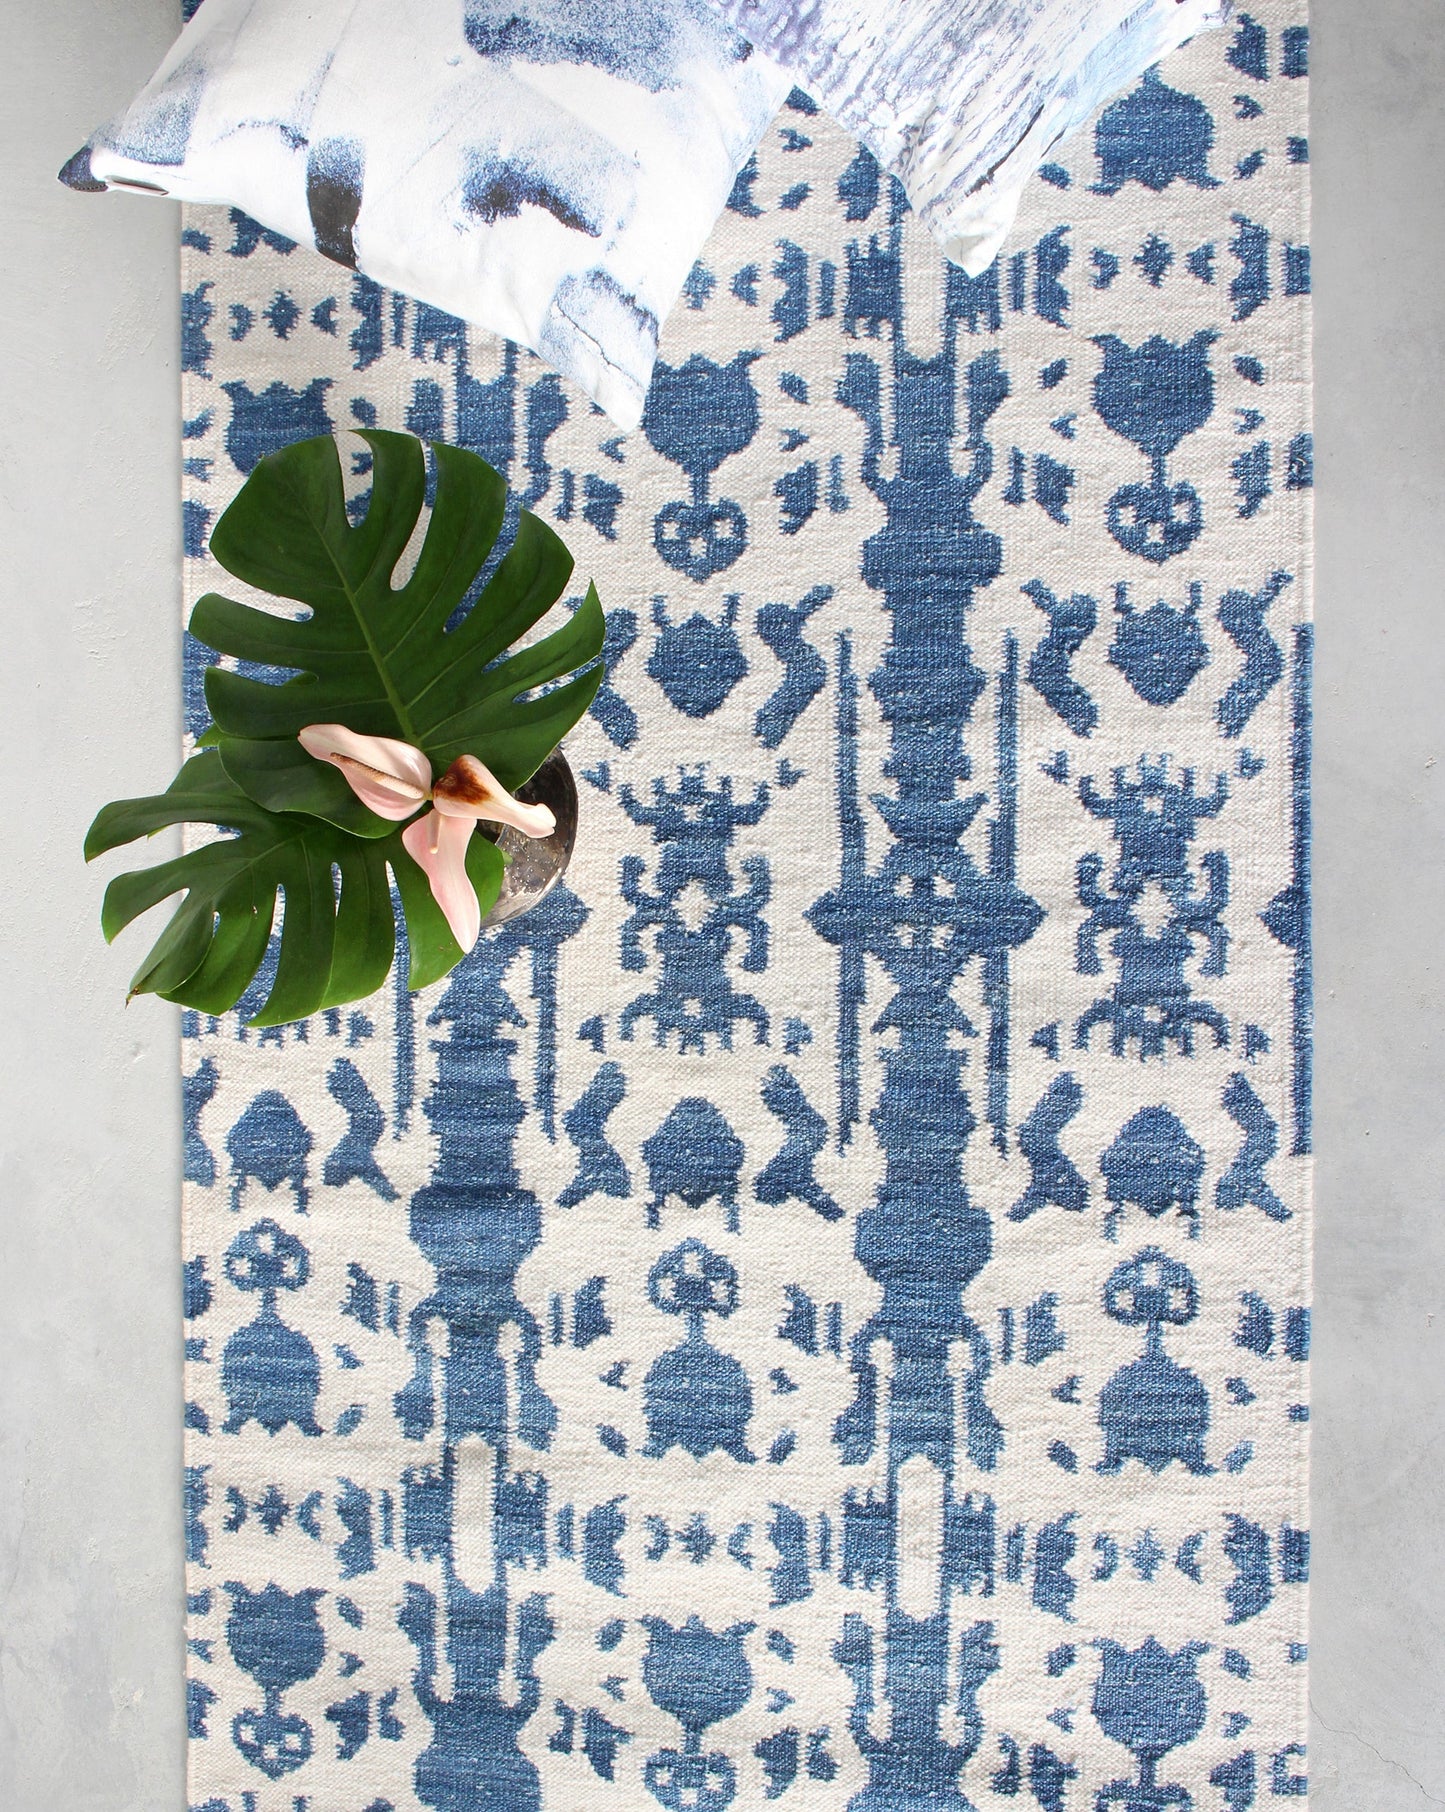 A blue and white Biami flatweave rug in Indigo color